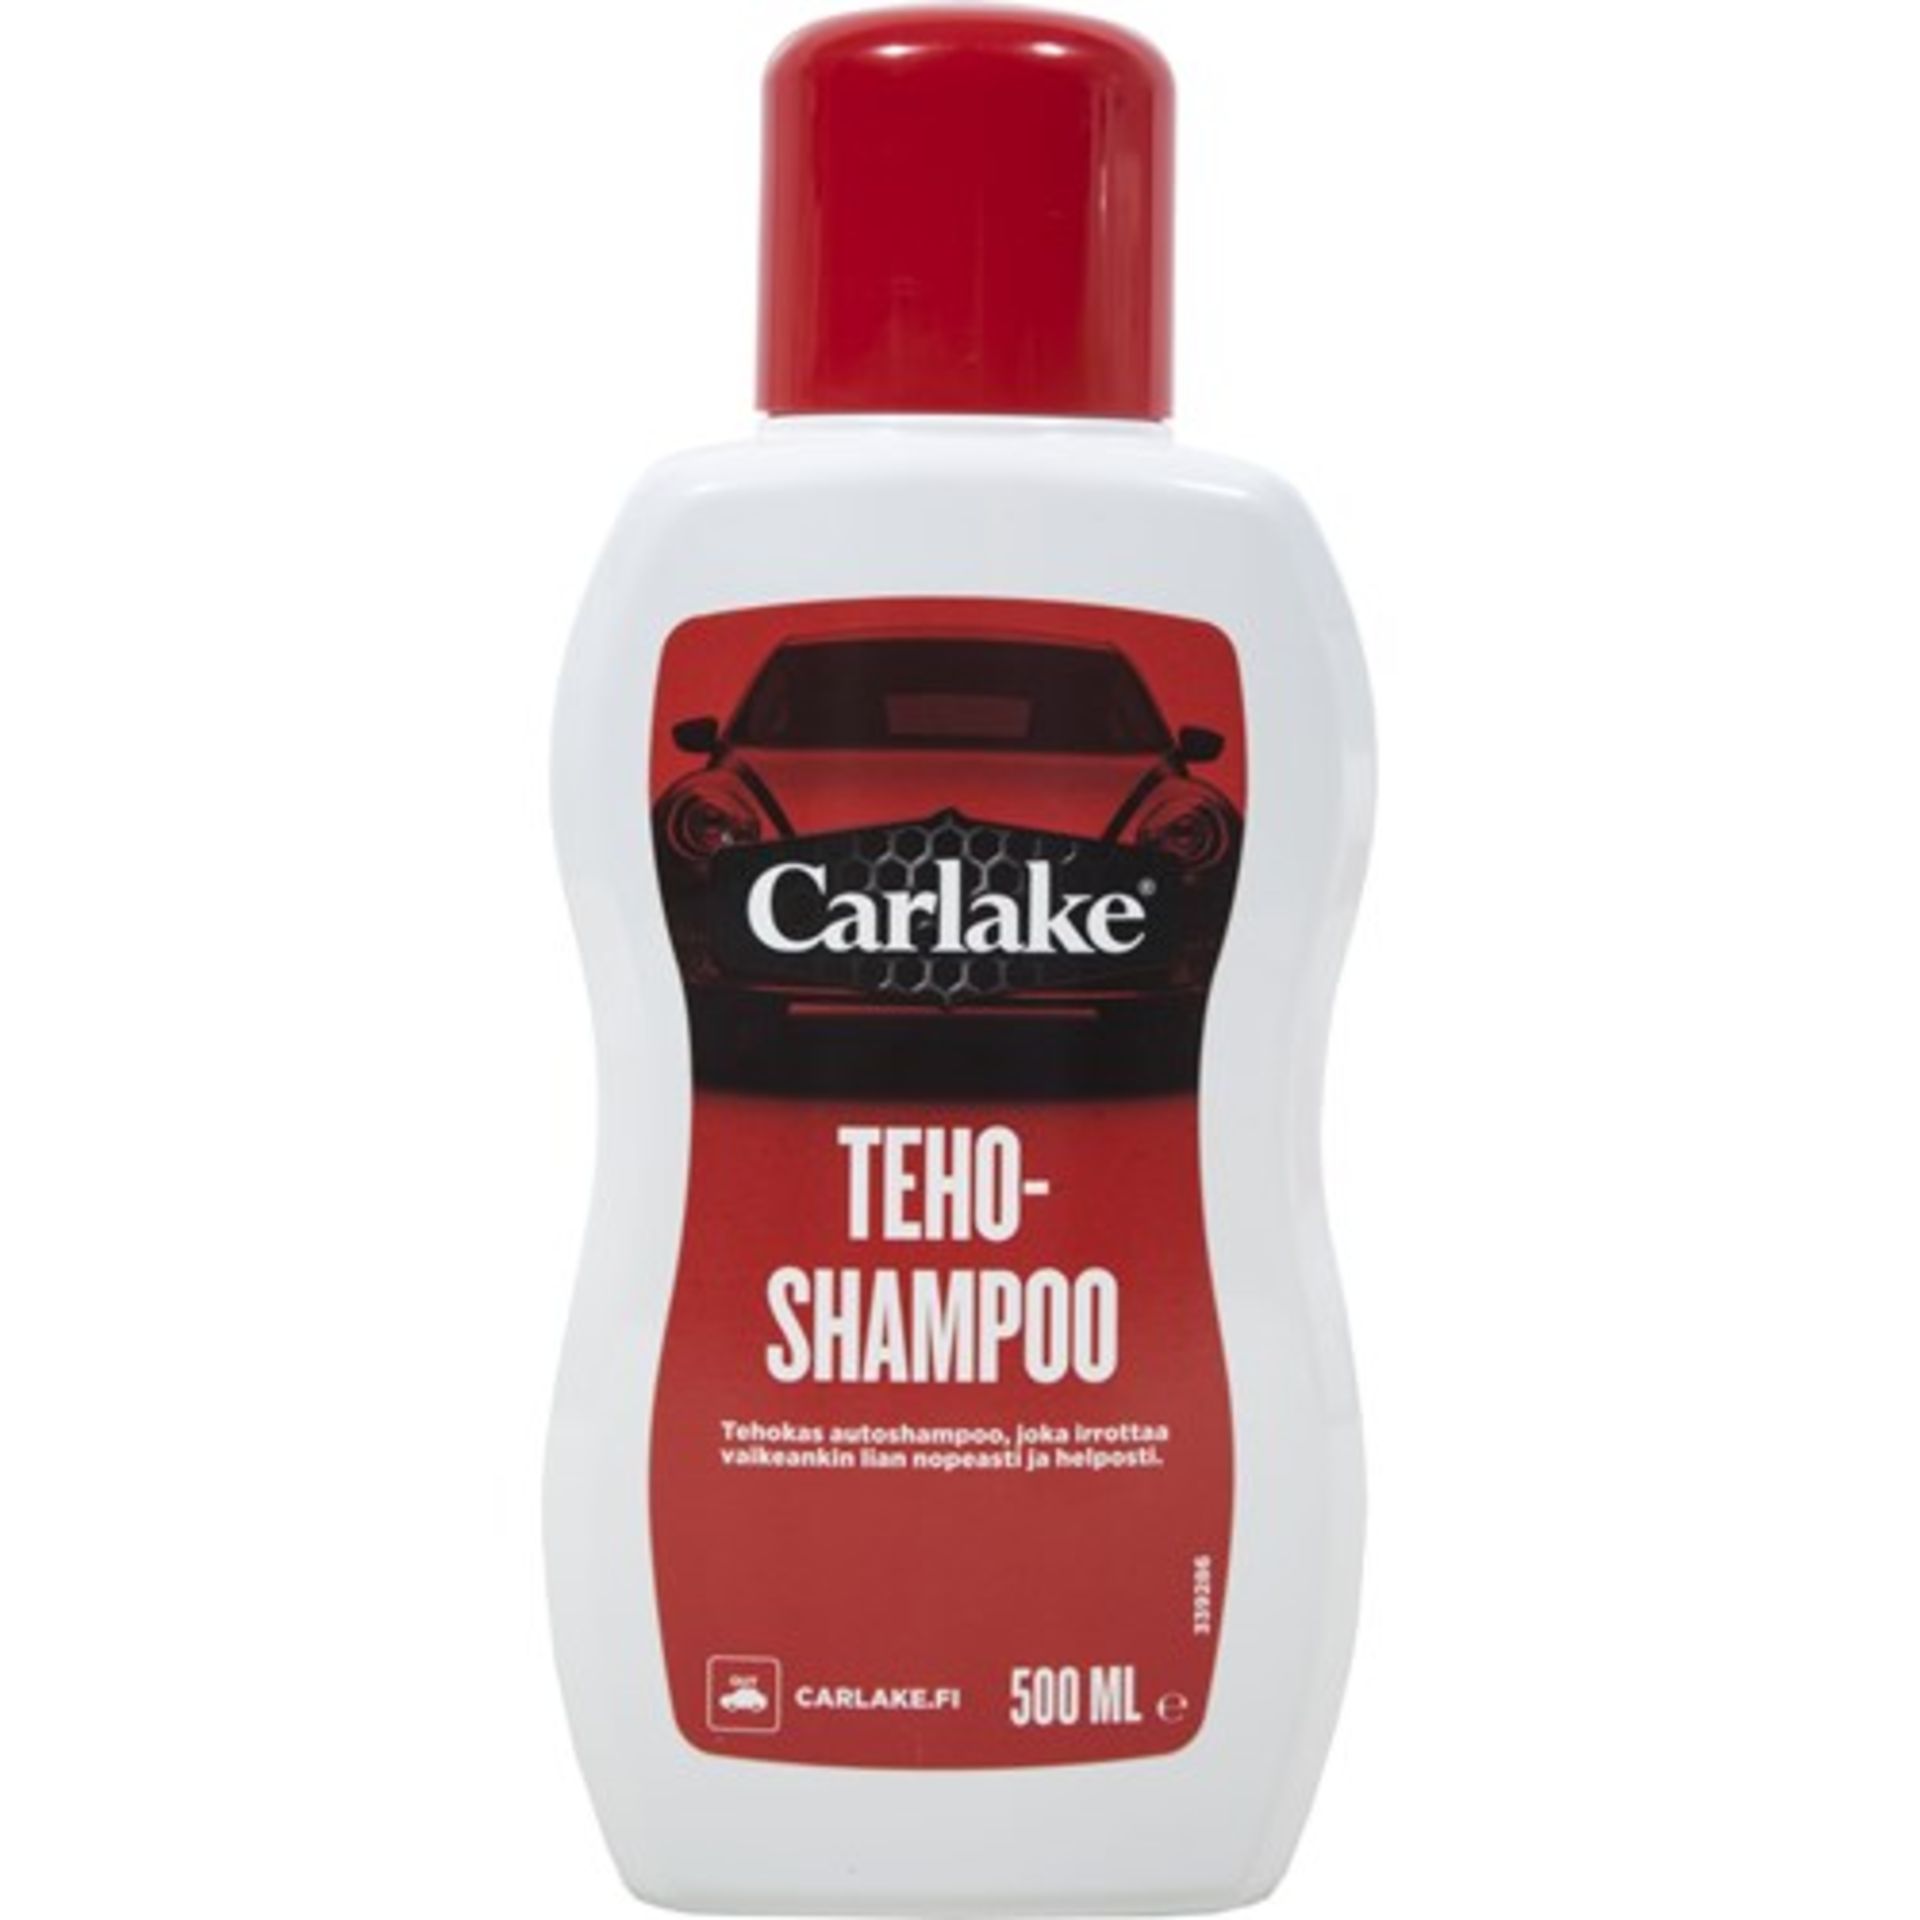 An Effective Car Shampoo Also Removes Heavier Dirt Quickly And Easily. Suitable For Ensuring A Clean